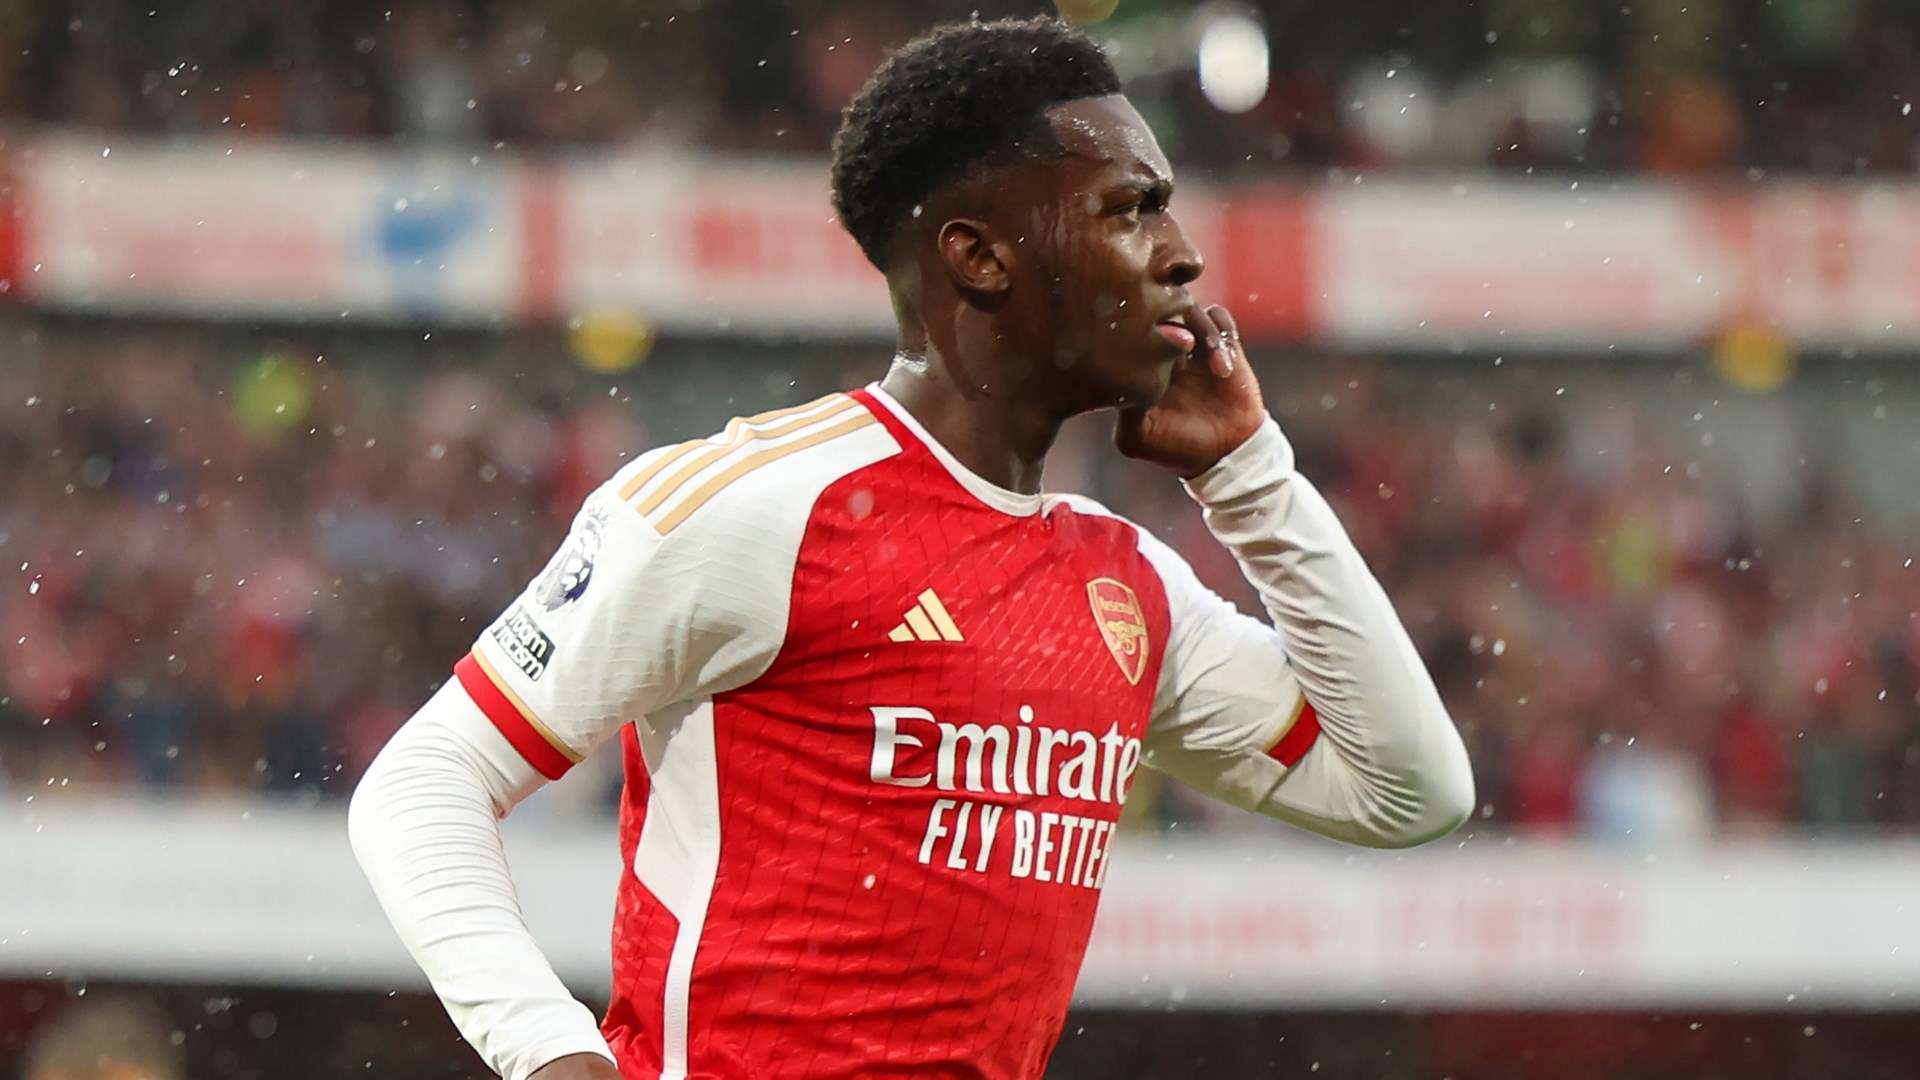 I'm in good form!' - Eddie Nketiah disappointed not to start for Arsenal before he came on to score crucial goal in draw against Fulham | Goal.com